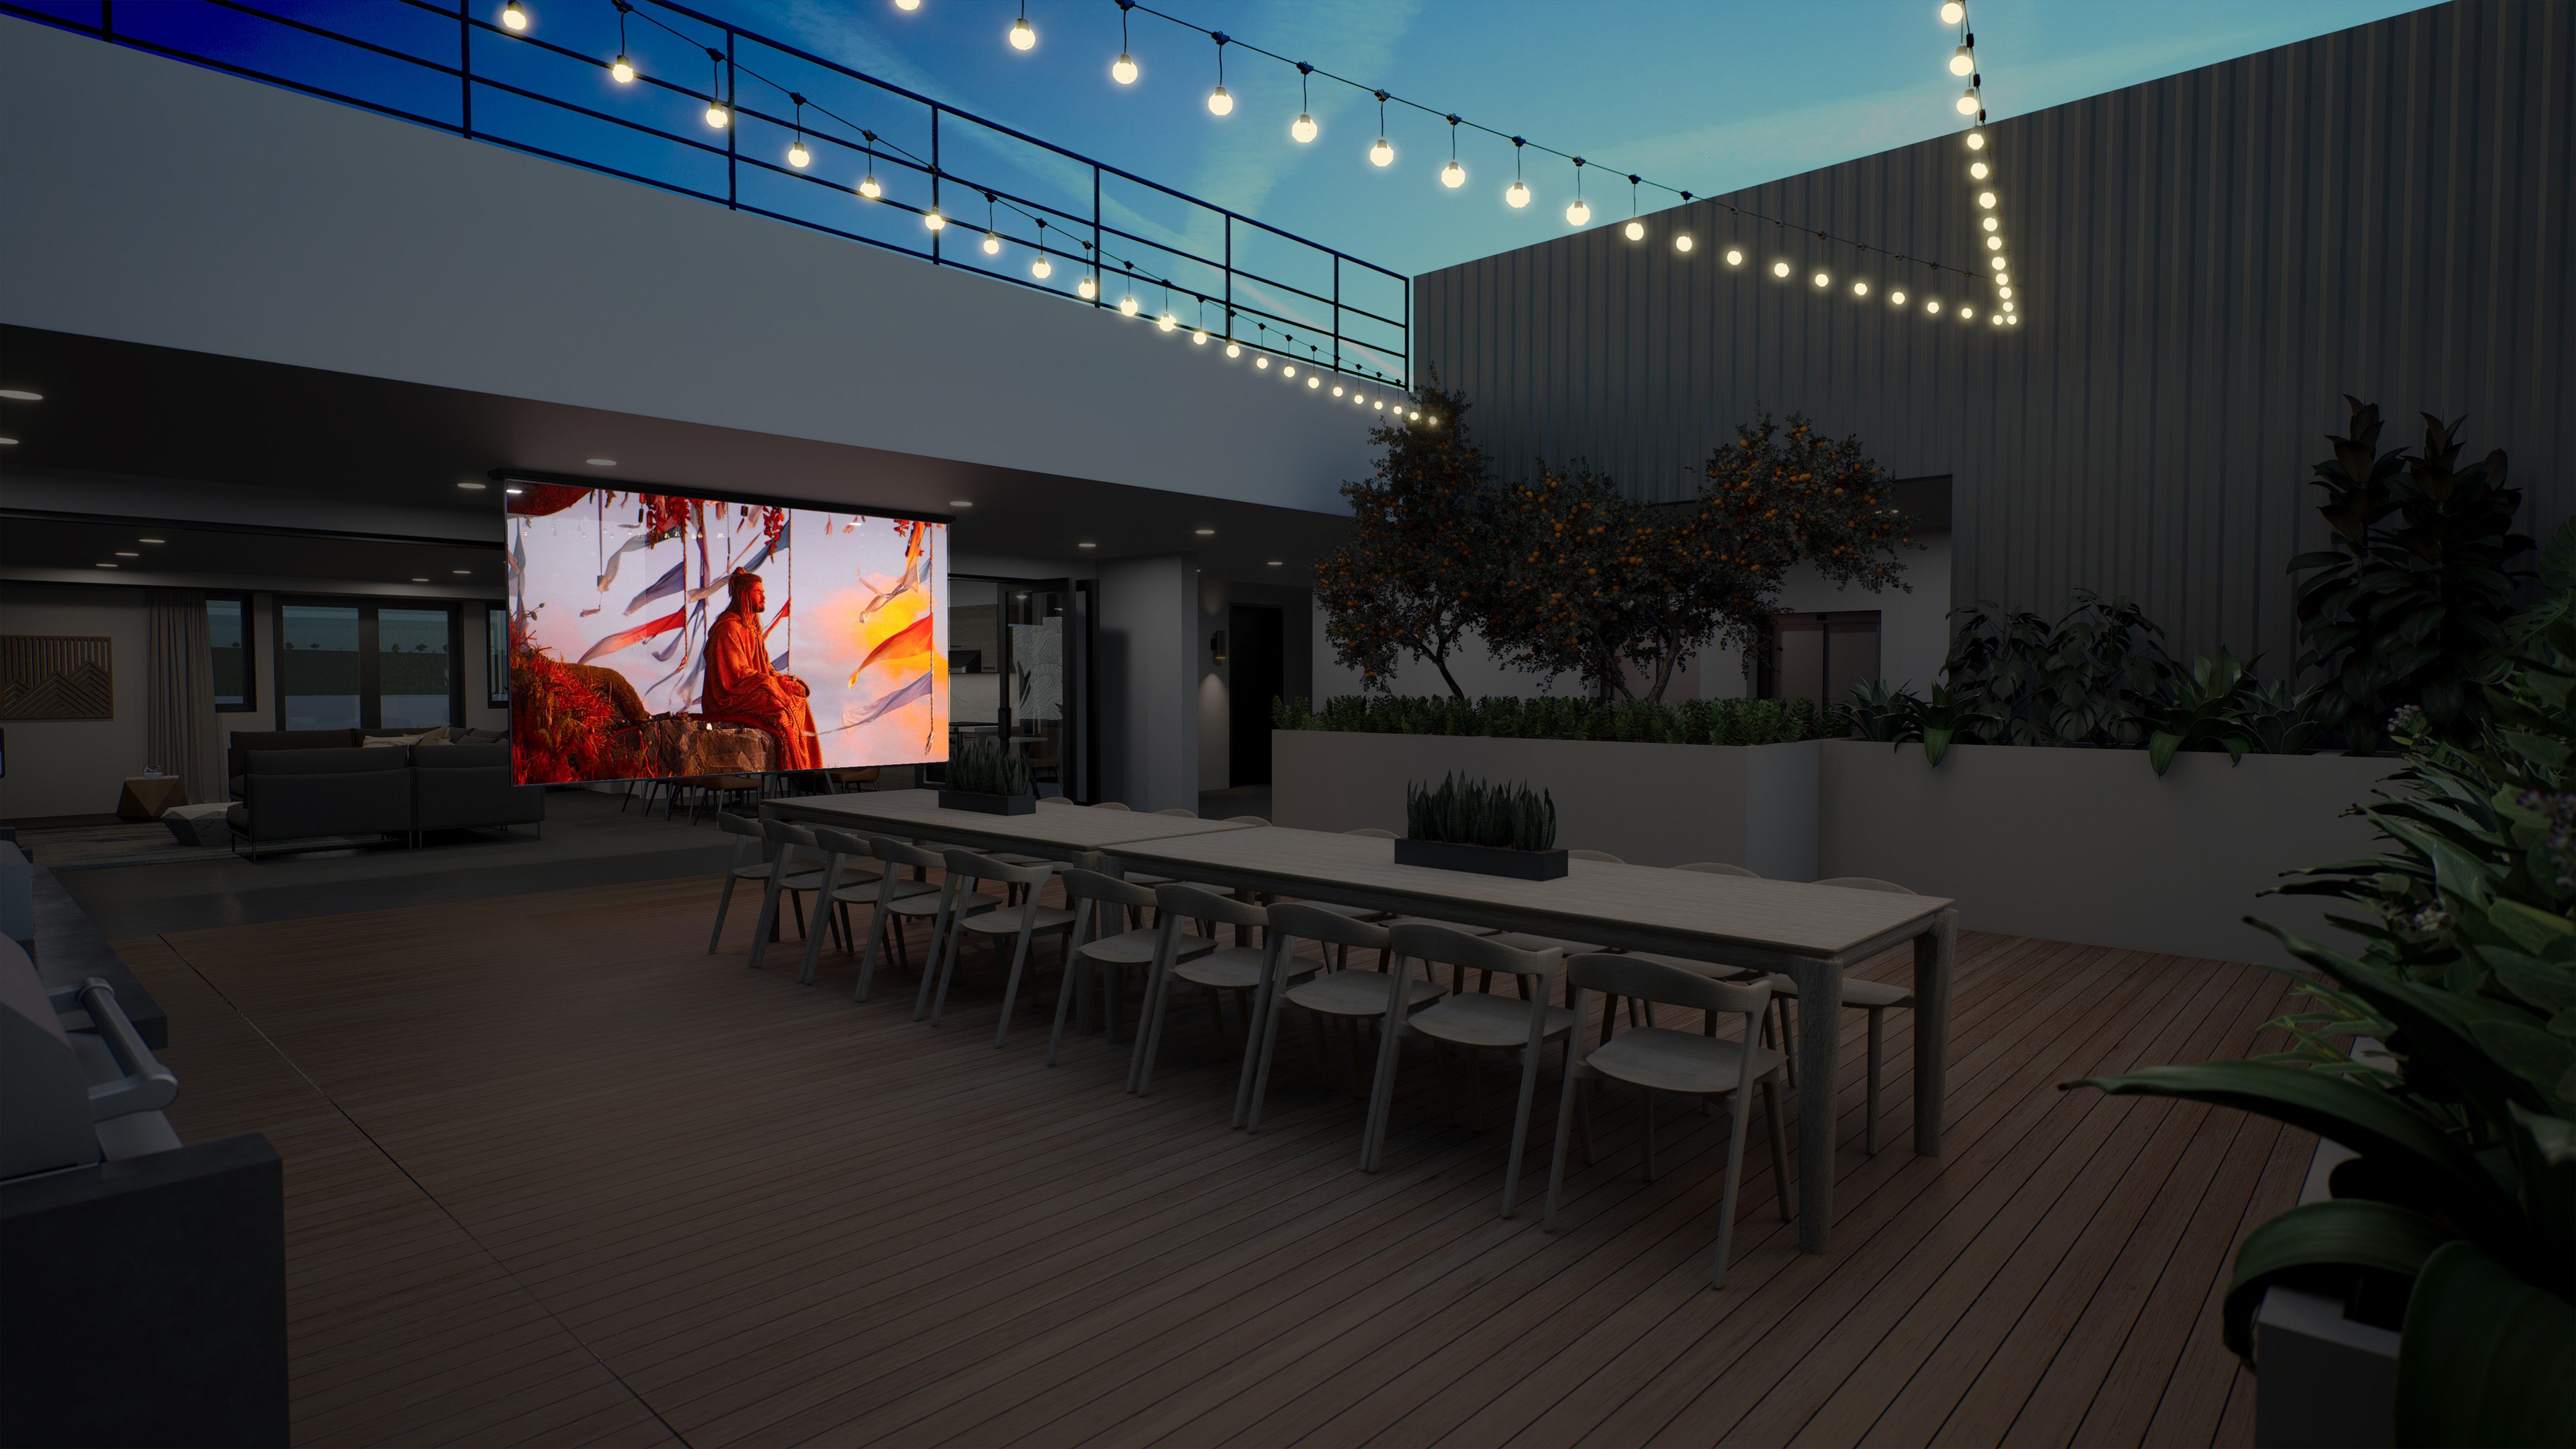 Outdoor patio at night with TV projector screen and long tables with ample seating, greenery surrounding and string lights above